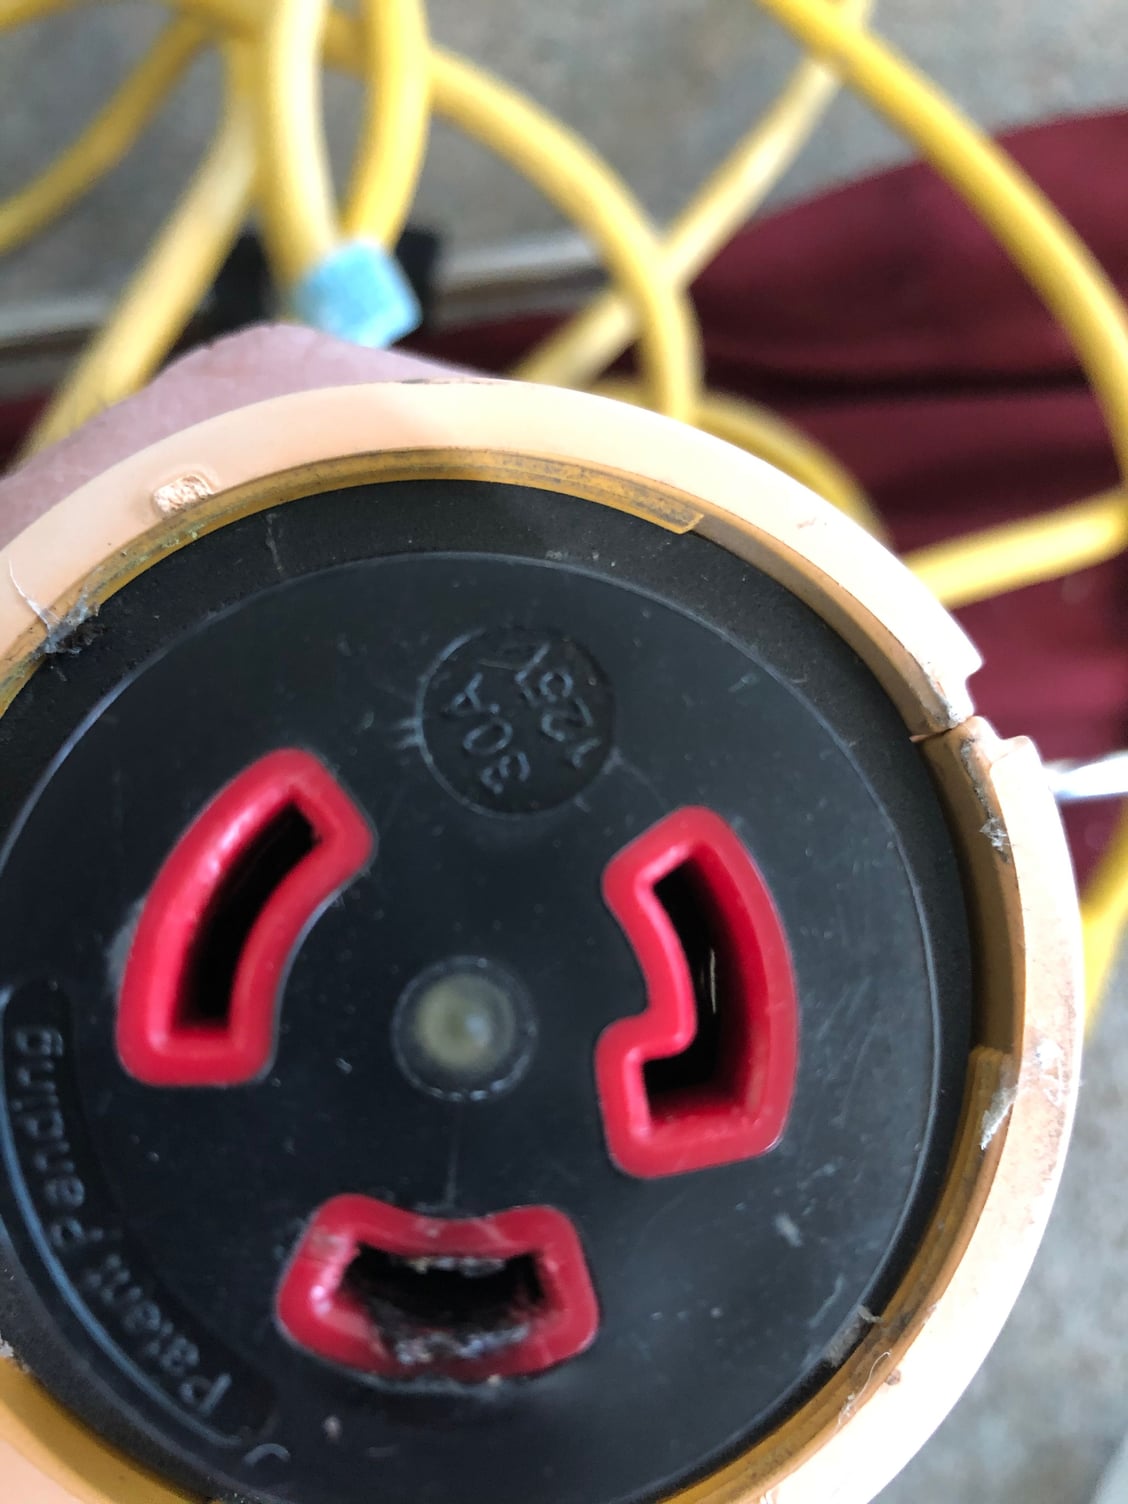 30 amp shore power cable arching (Picture) - The Hull Truth